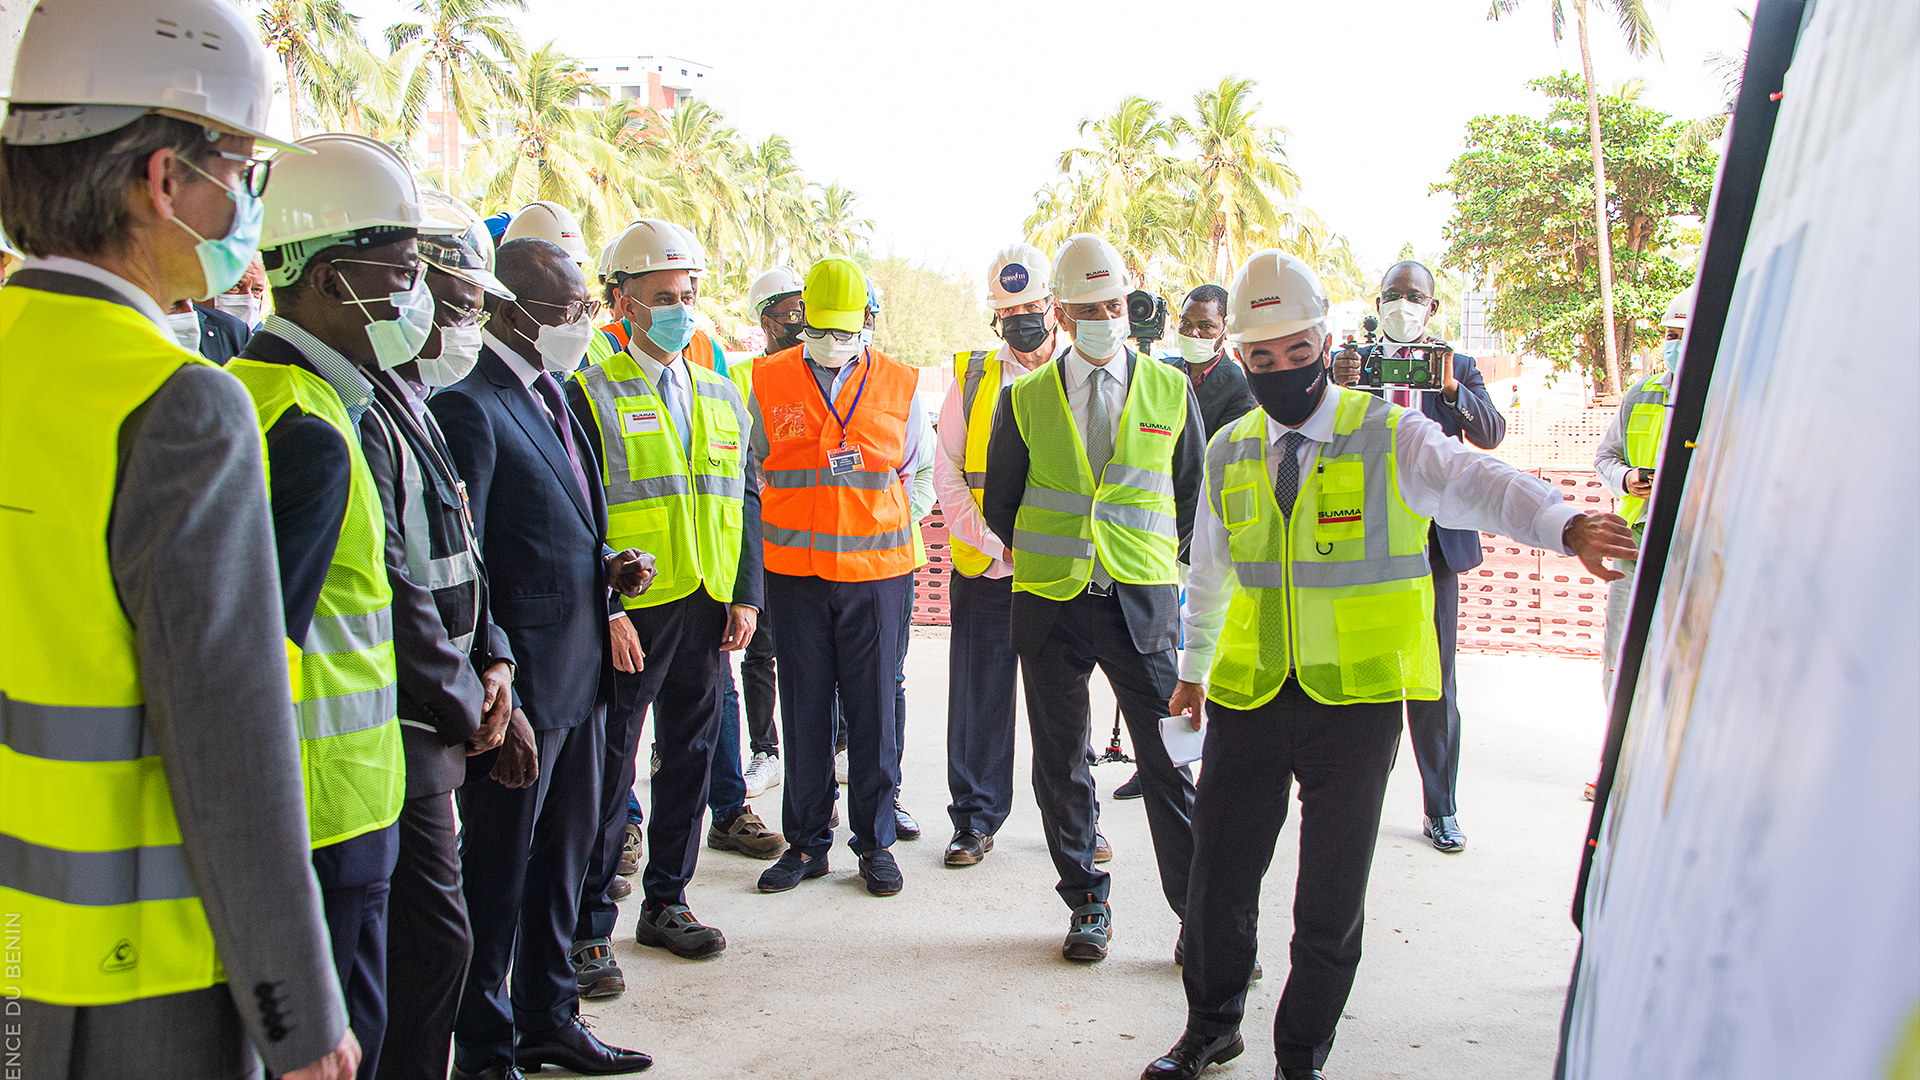 Government support secures major contract for UK construction in Benin